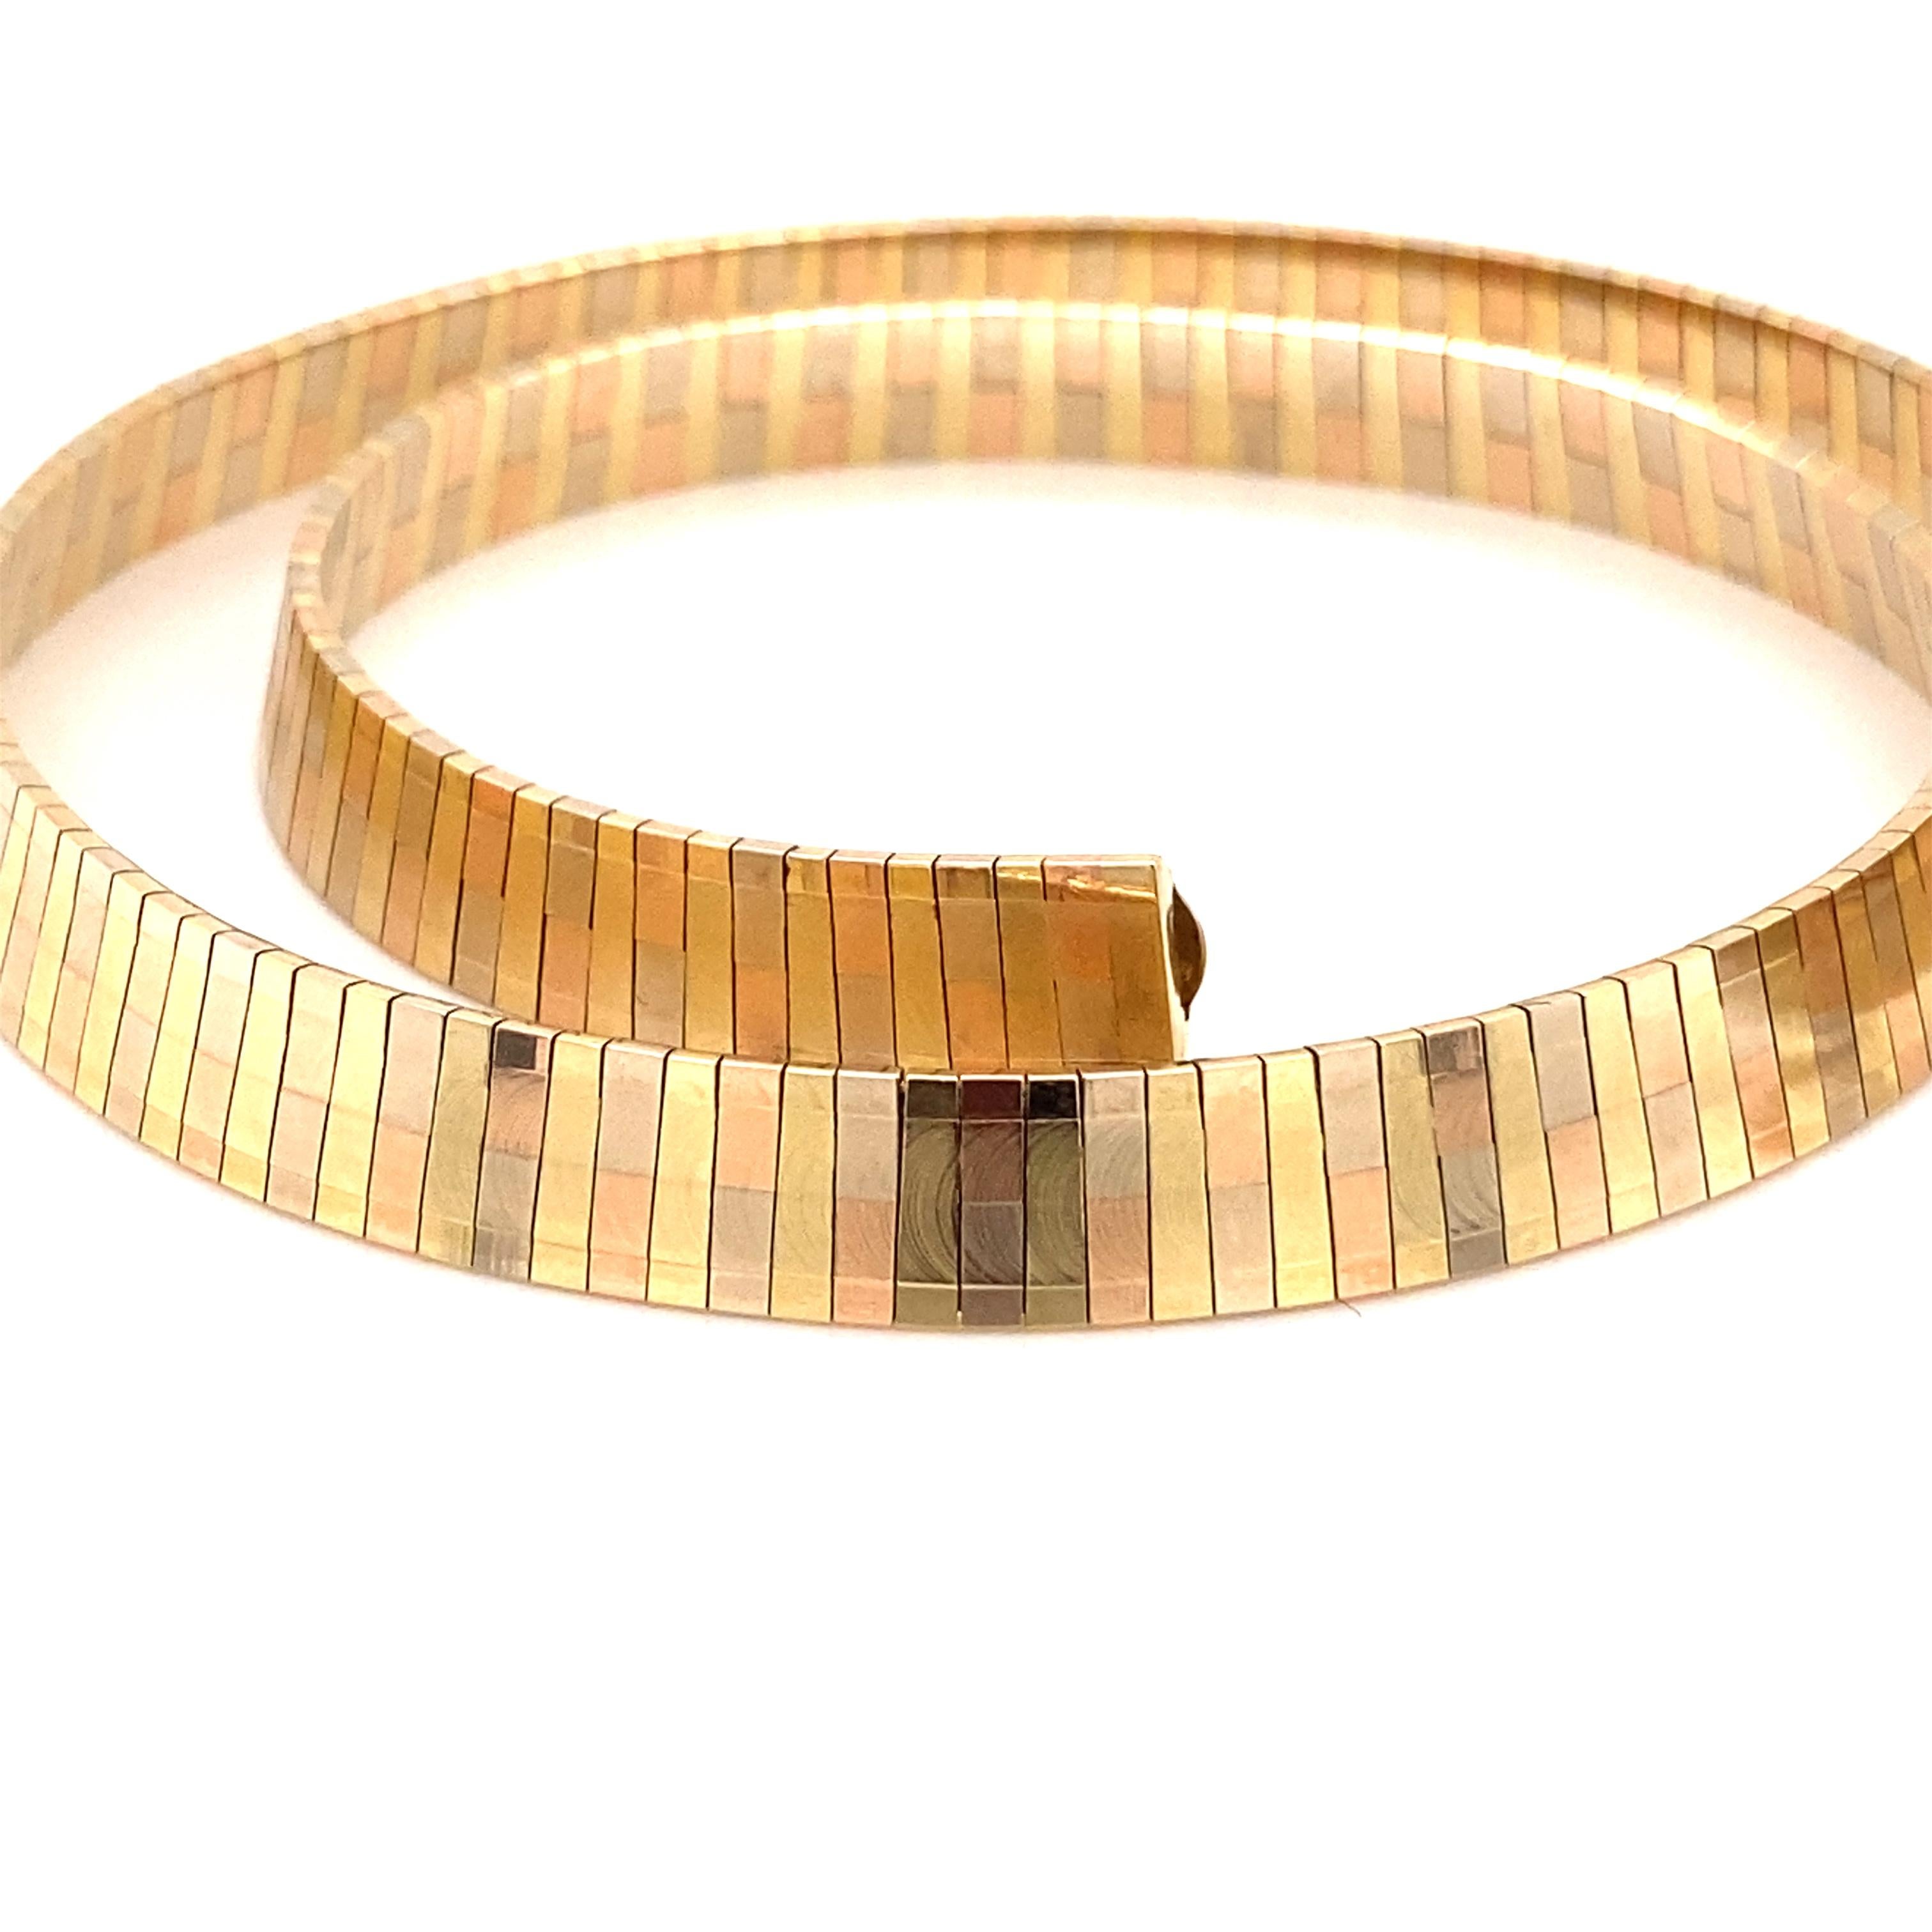 Vintage 1980’s 14K Yellow Gold Tri-Color Omega Choker Necklace - The Italian made necklace has alternating rose gold, yellow gold and white gold and lays beautiful on the neck. The necklace is 8mm wide and features a plunger clasp with a figure 8